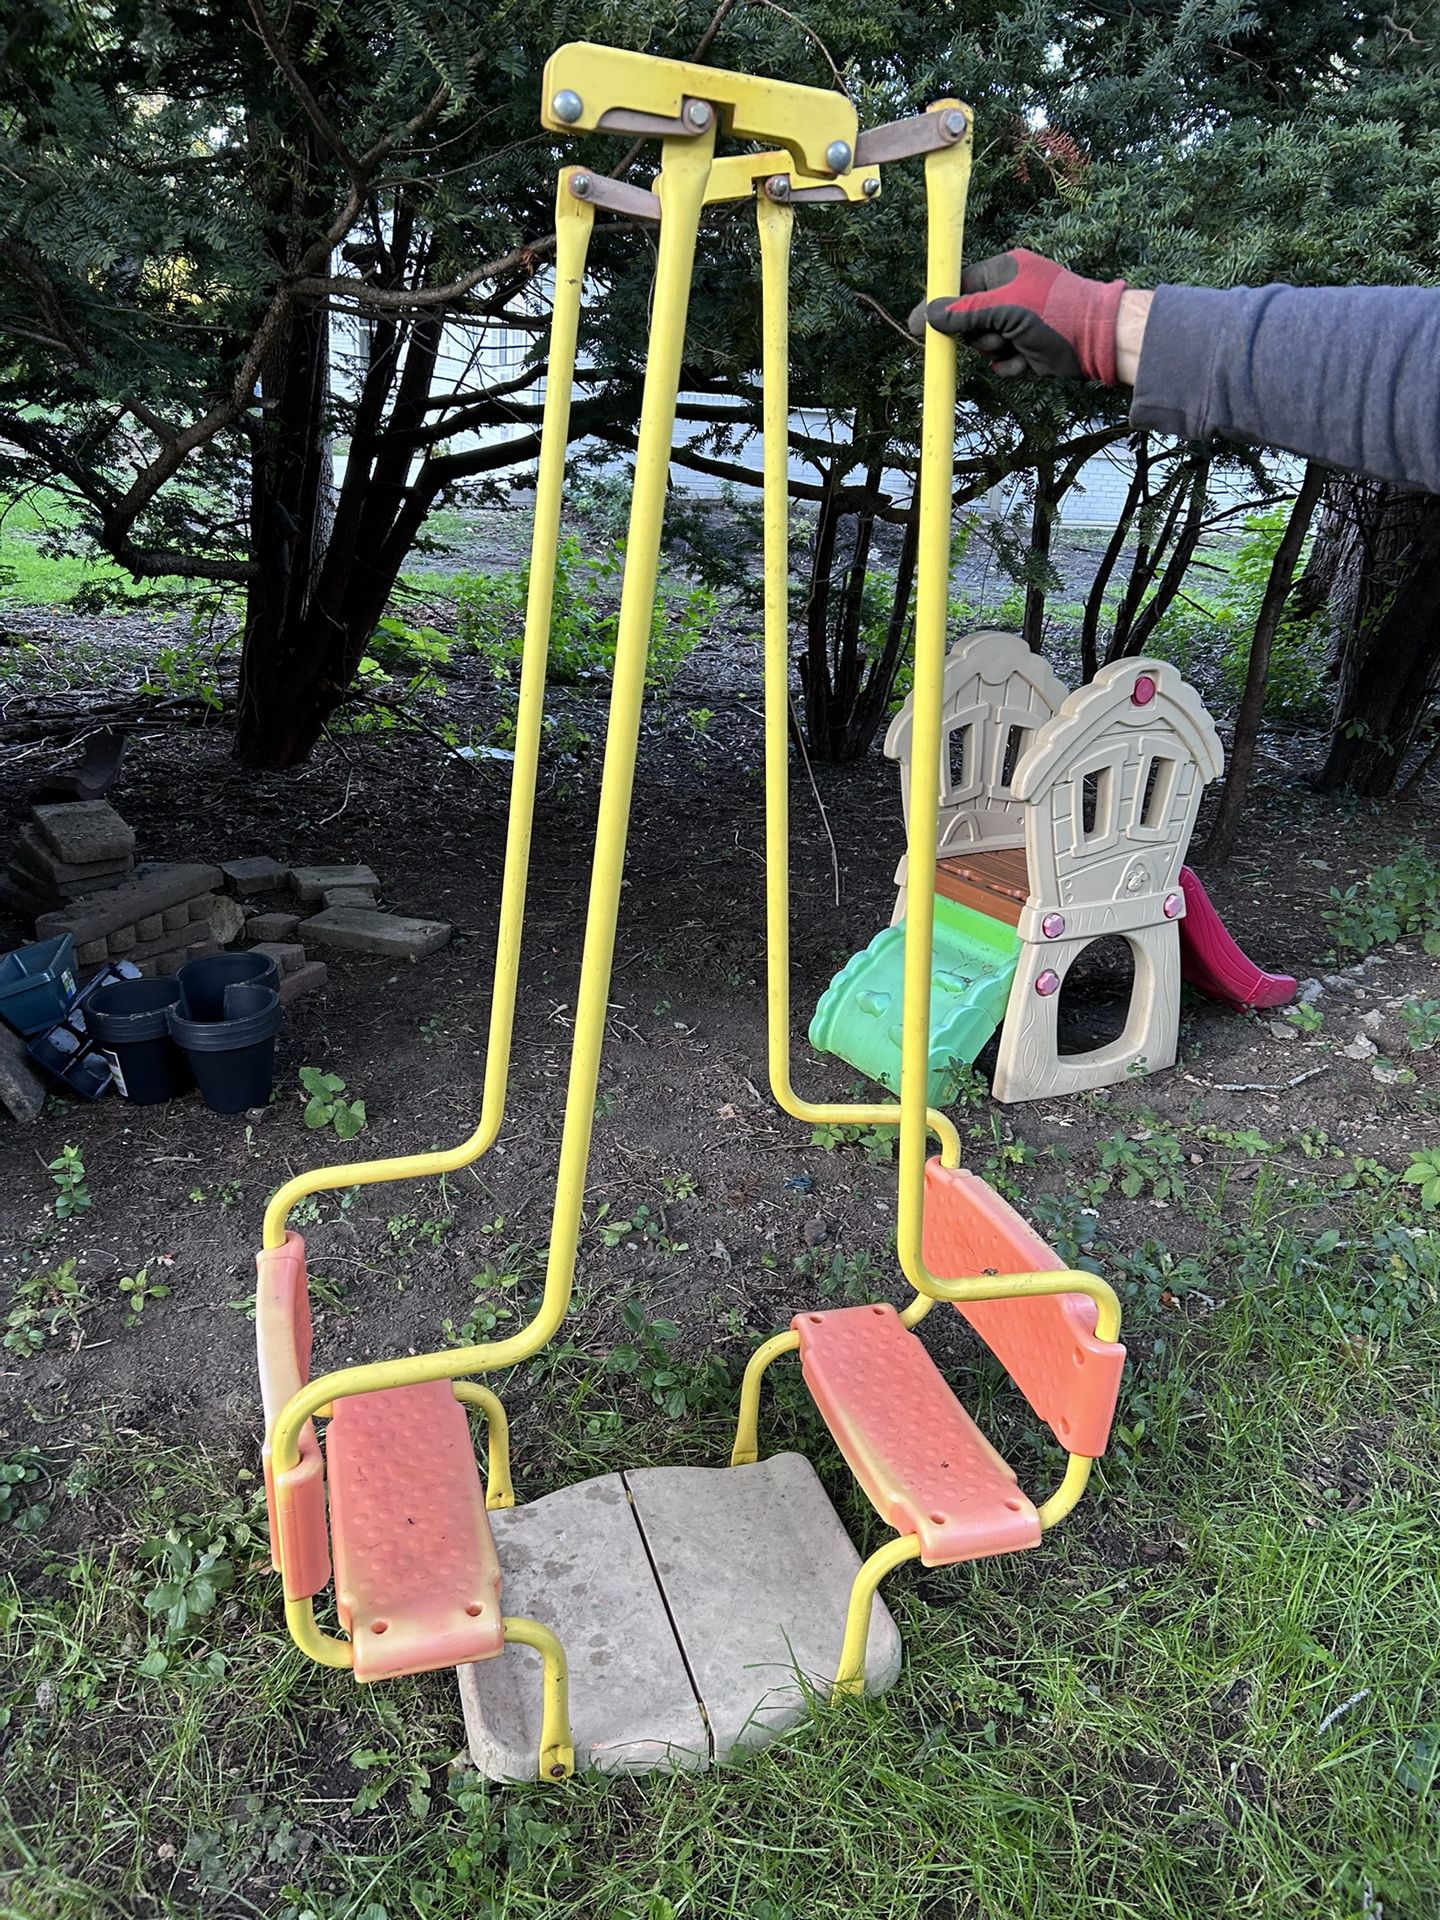 Bench Swing For Play set